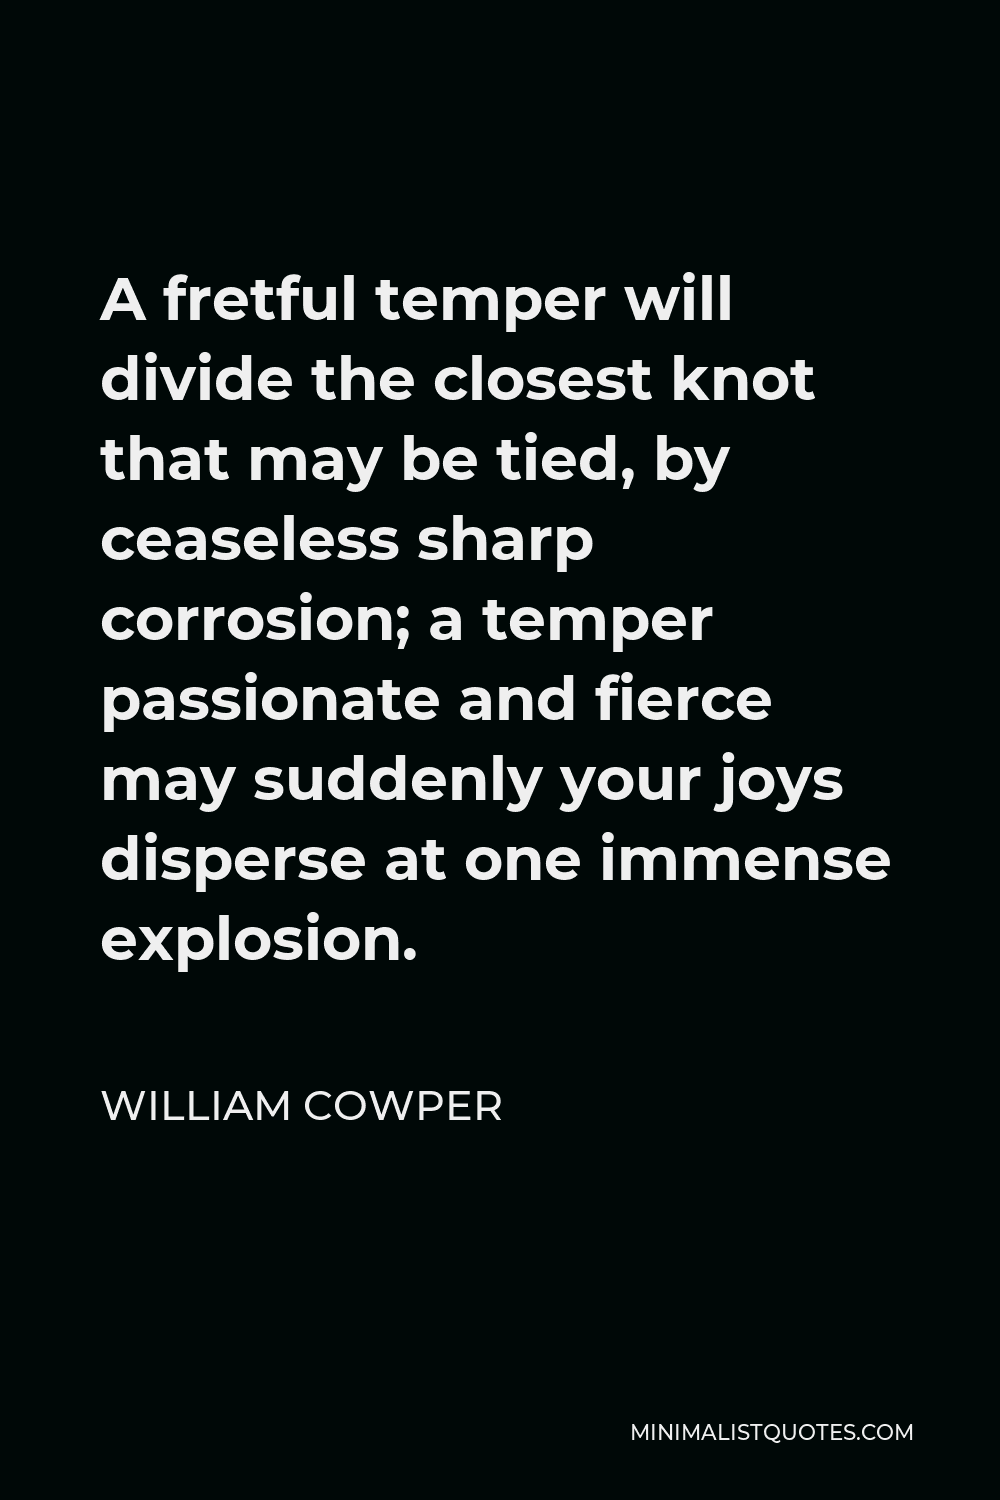 William Cowper Quote - A fretful temper will divide the closest knot that may be tied, by ceaseless sharp corrosion; a temper passionate and fierce may suddenly your joys disperse at one immense explosion.